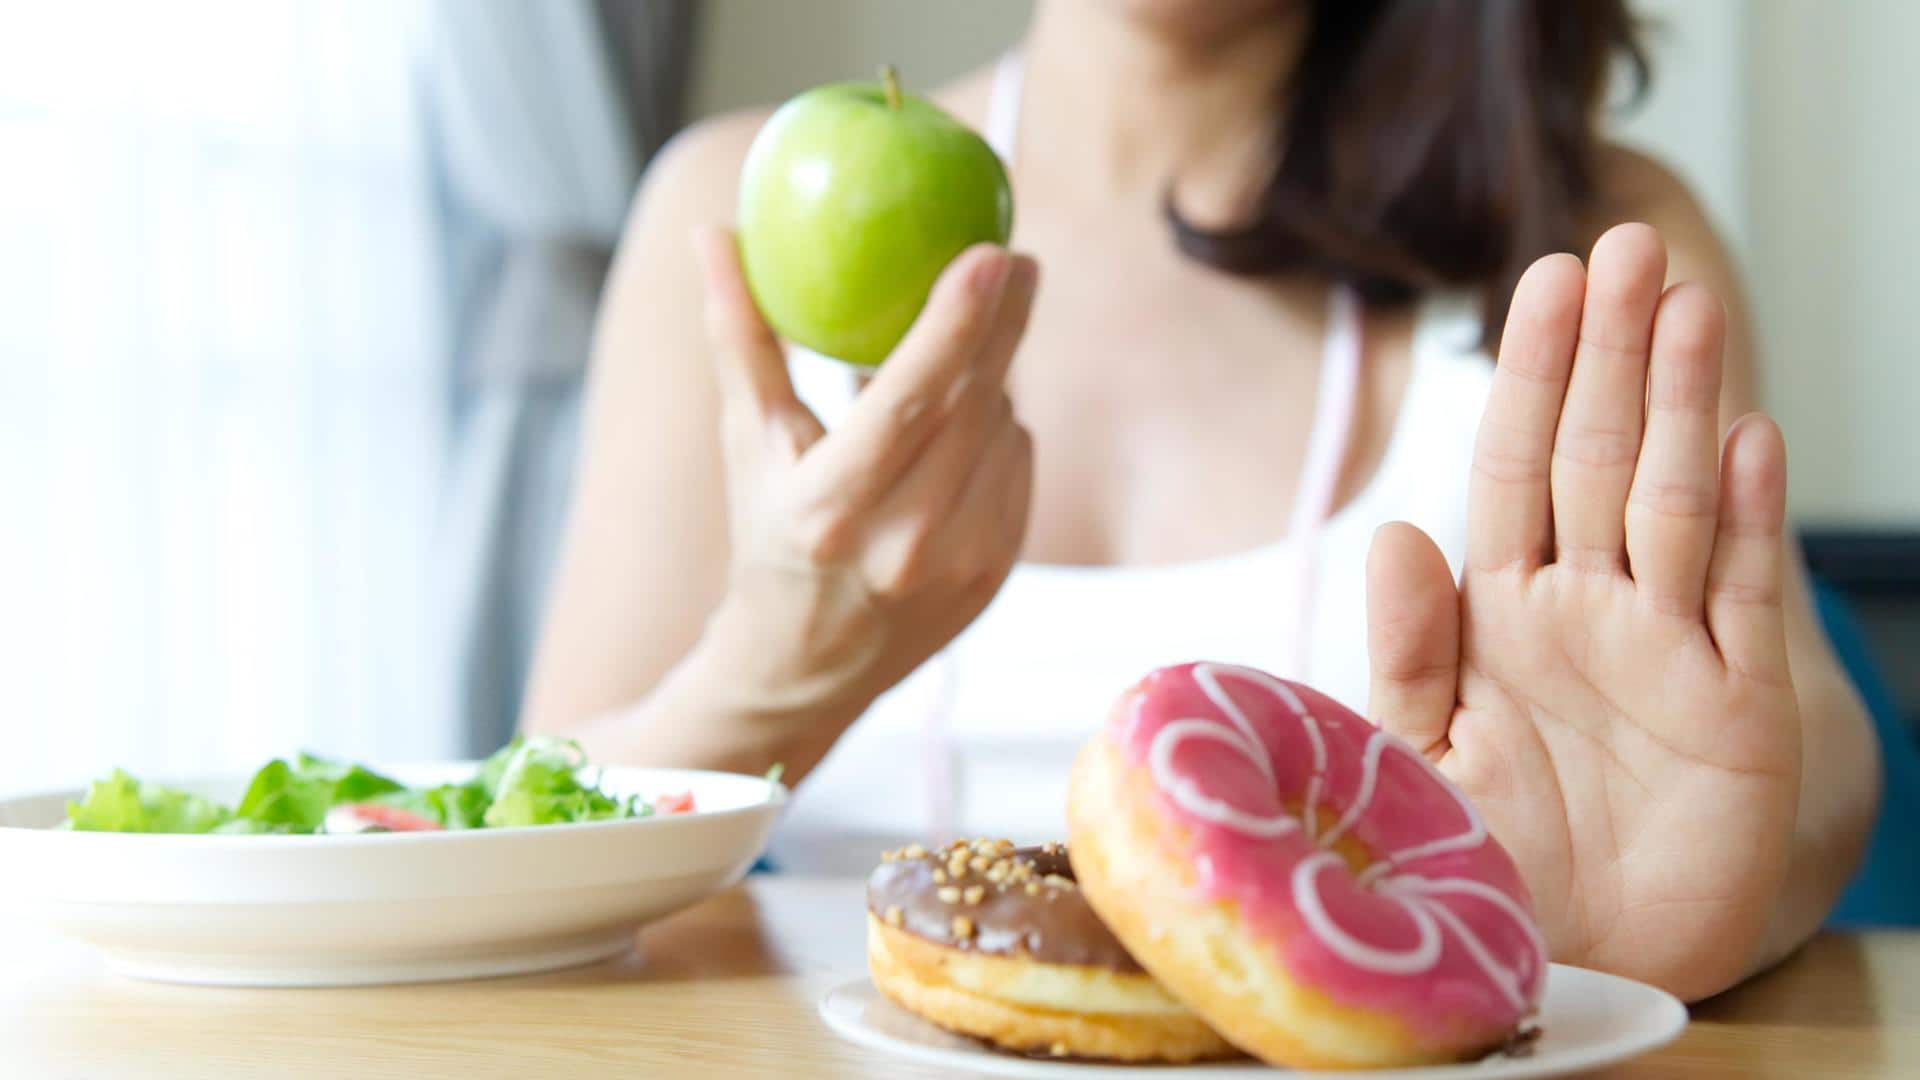 5 biggest myths about dieting everyone should know